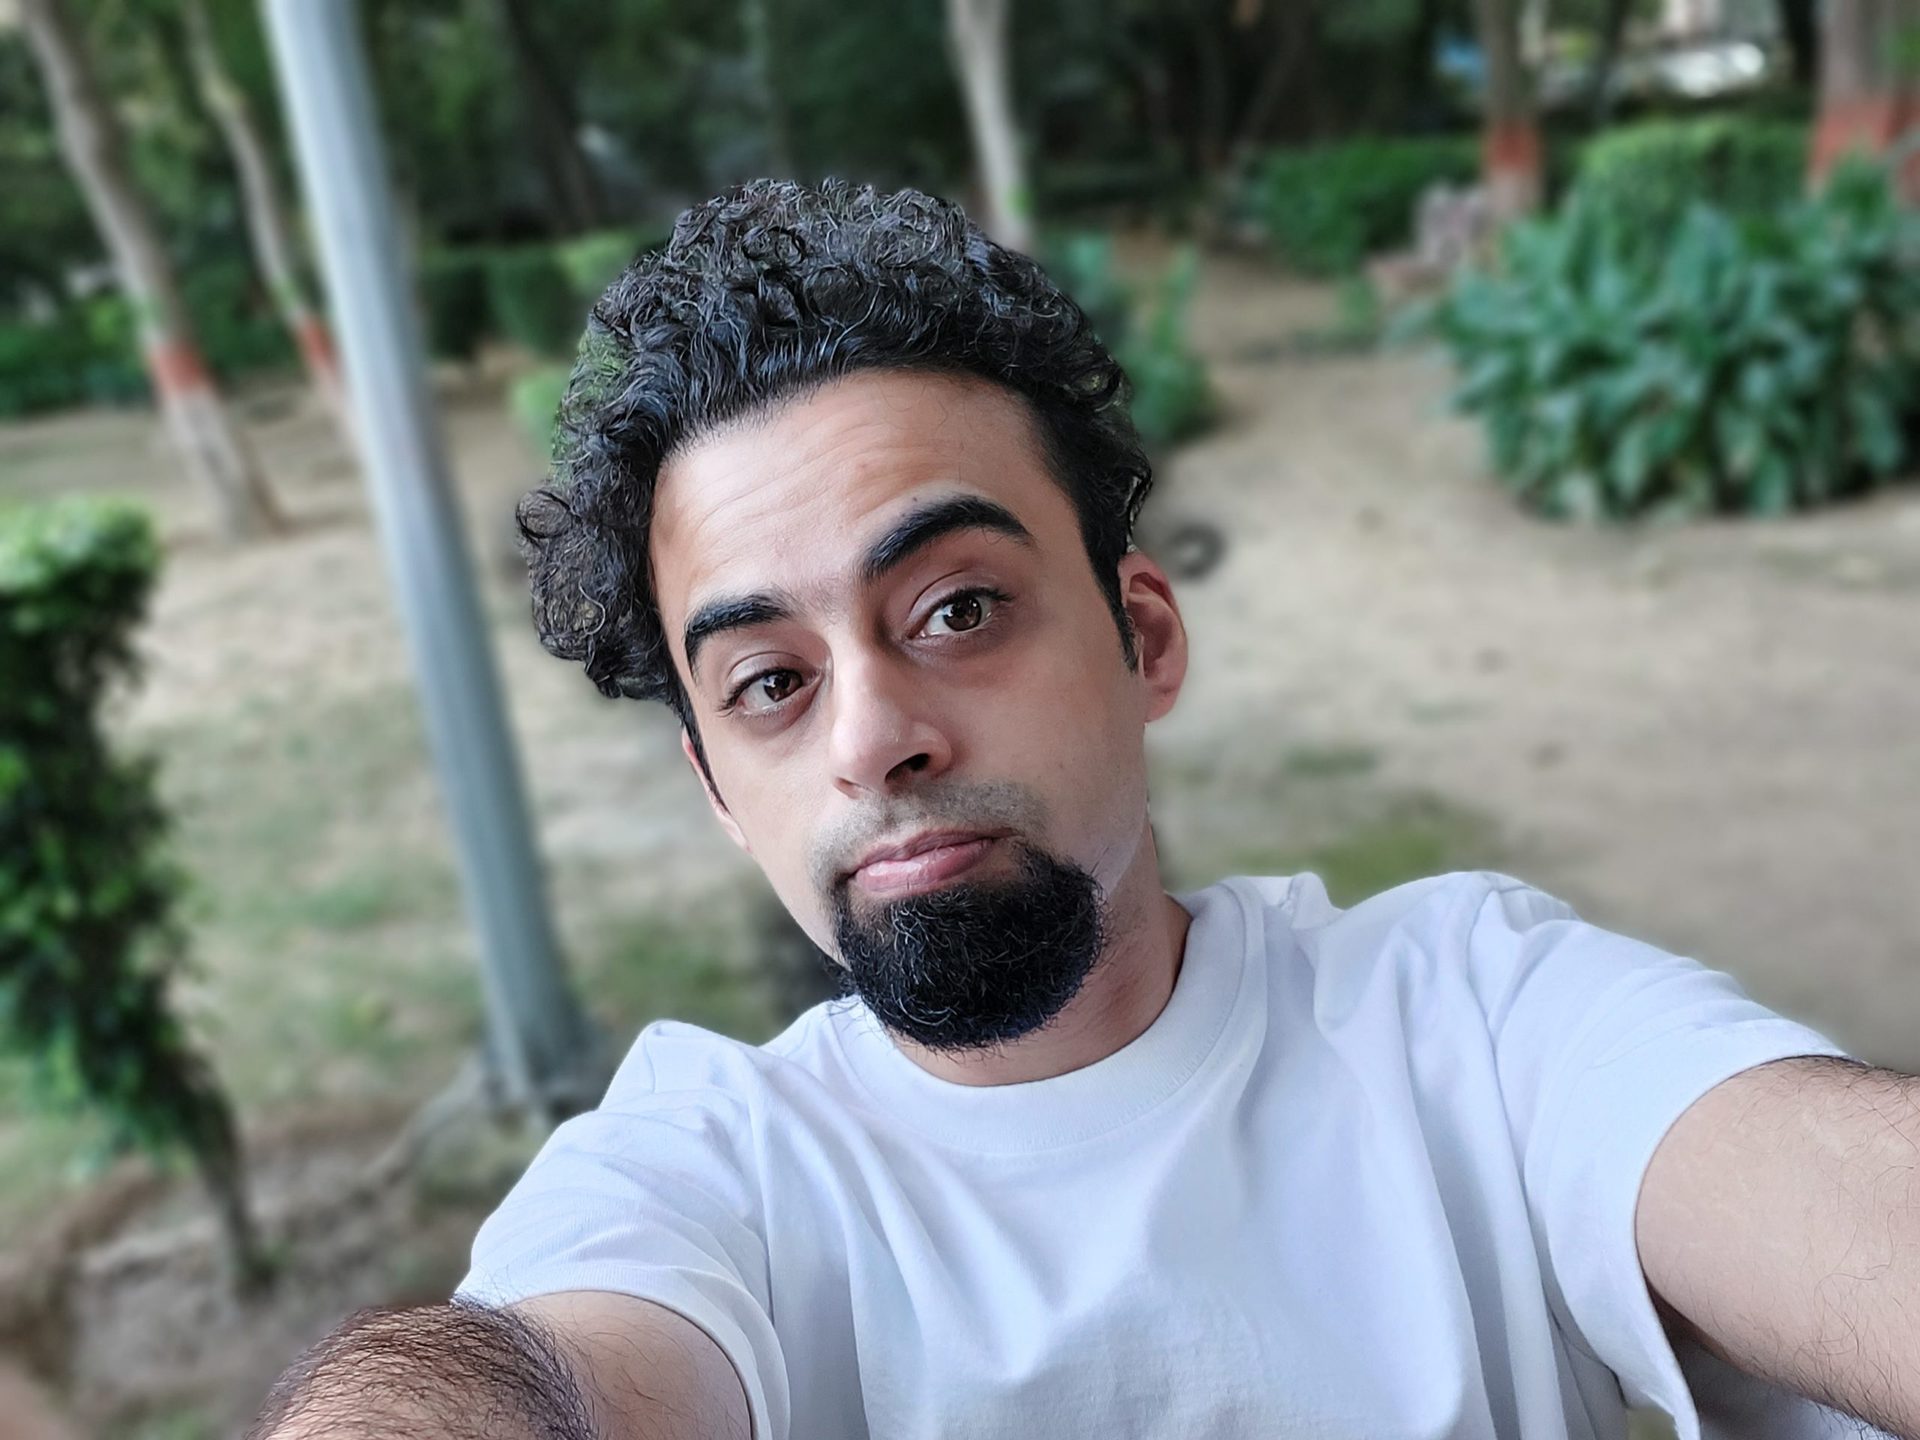 Samsung galaxy m52 camera sample selfie normal portrait of a man with dark curly hair and a beard wearing a white t-shirt outdoors